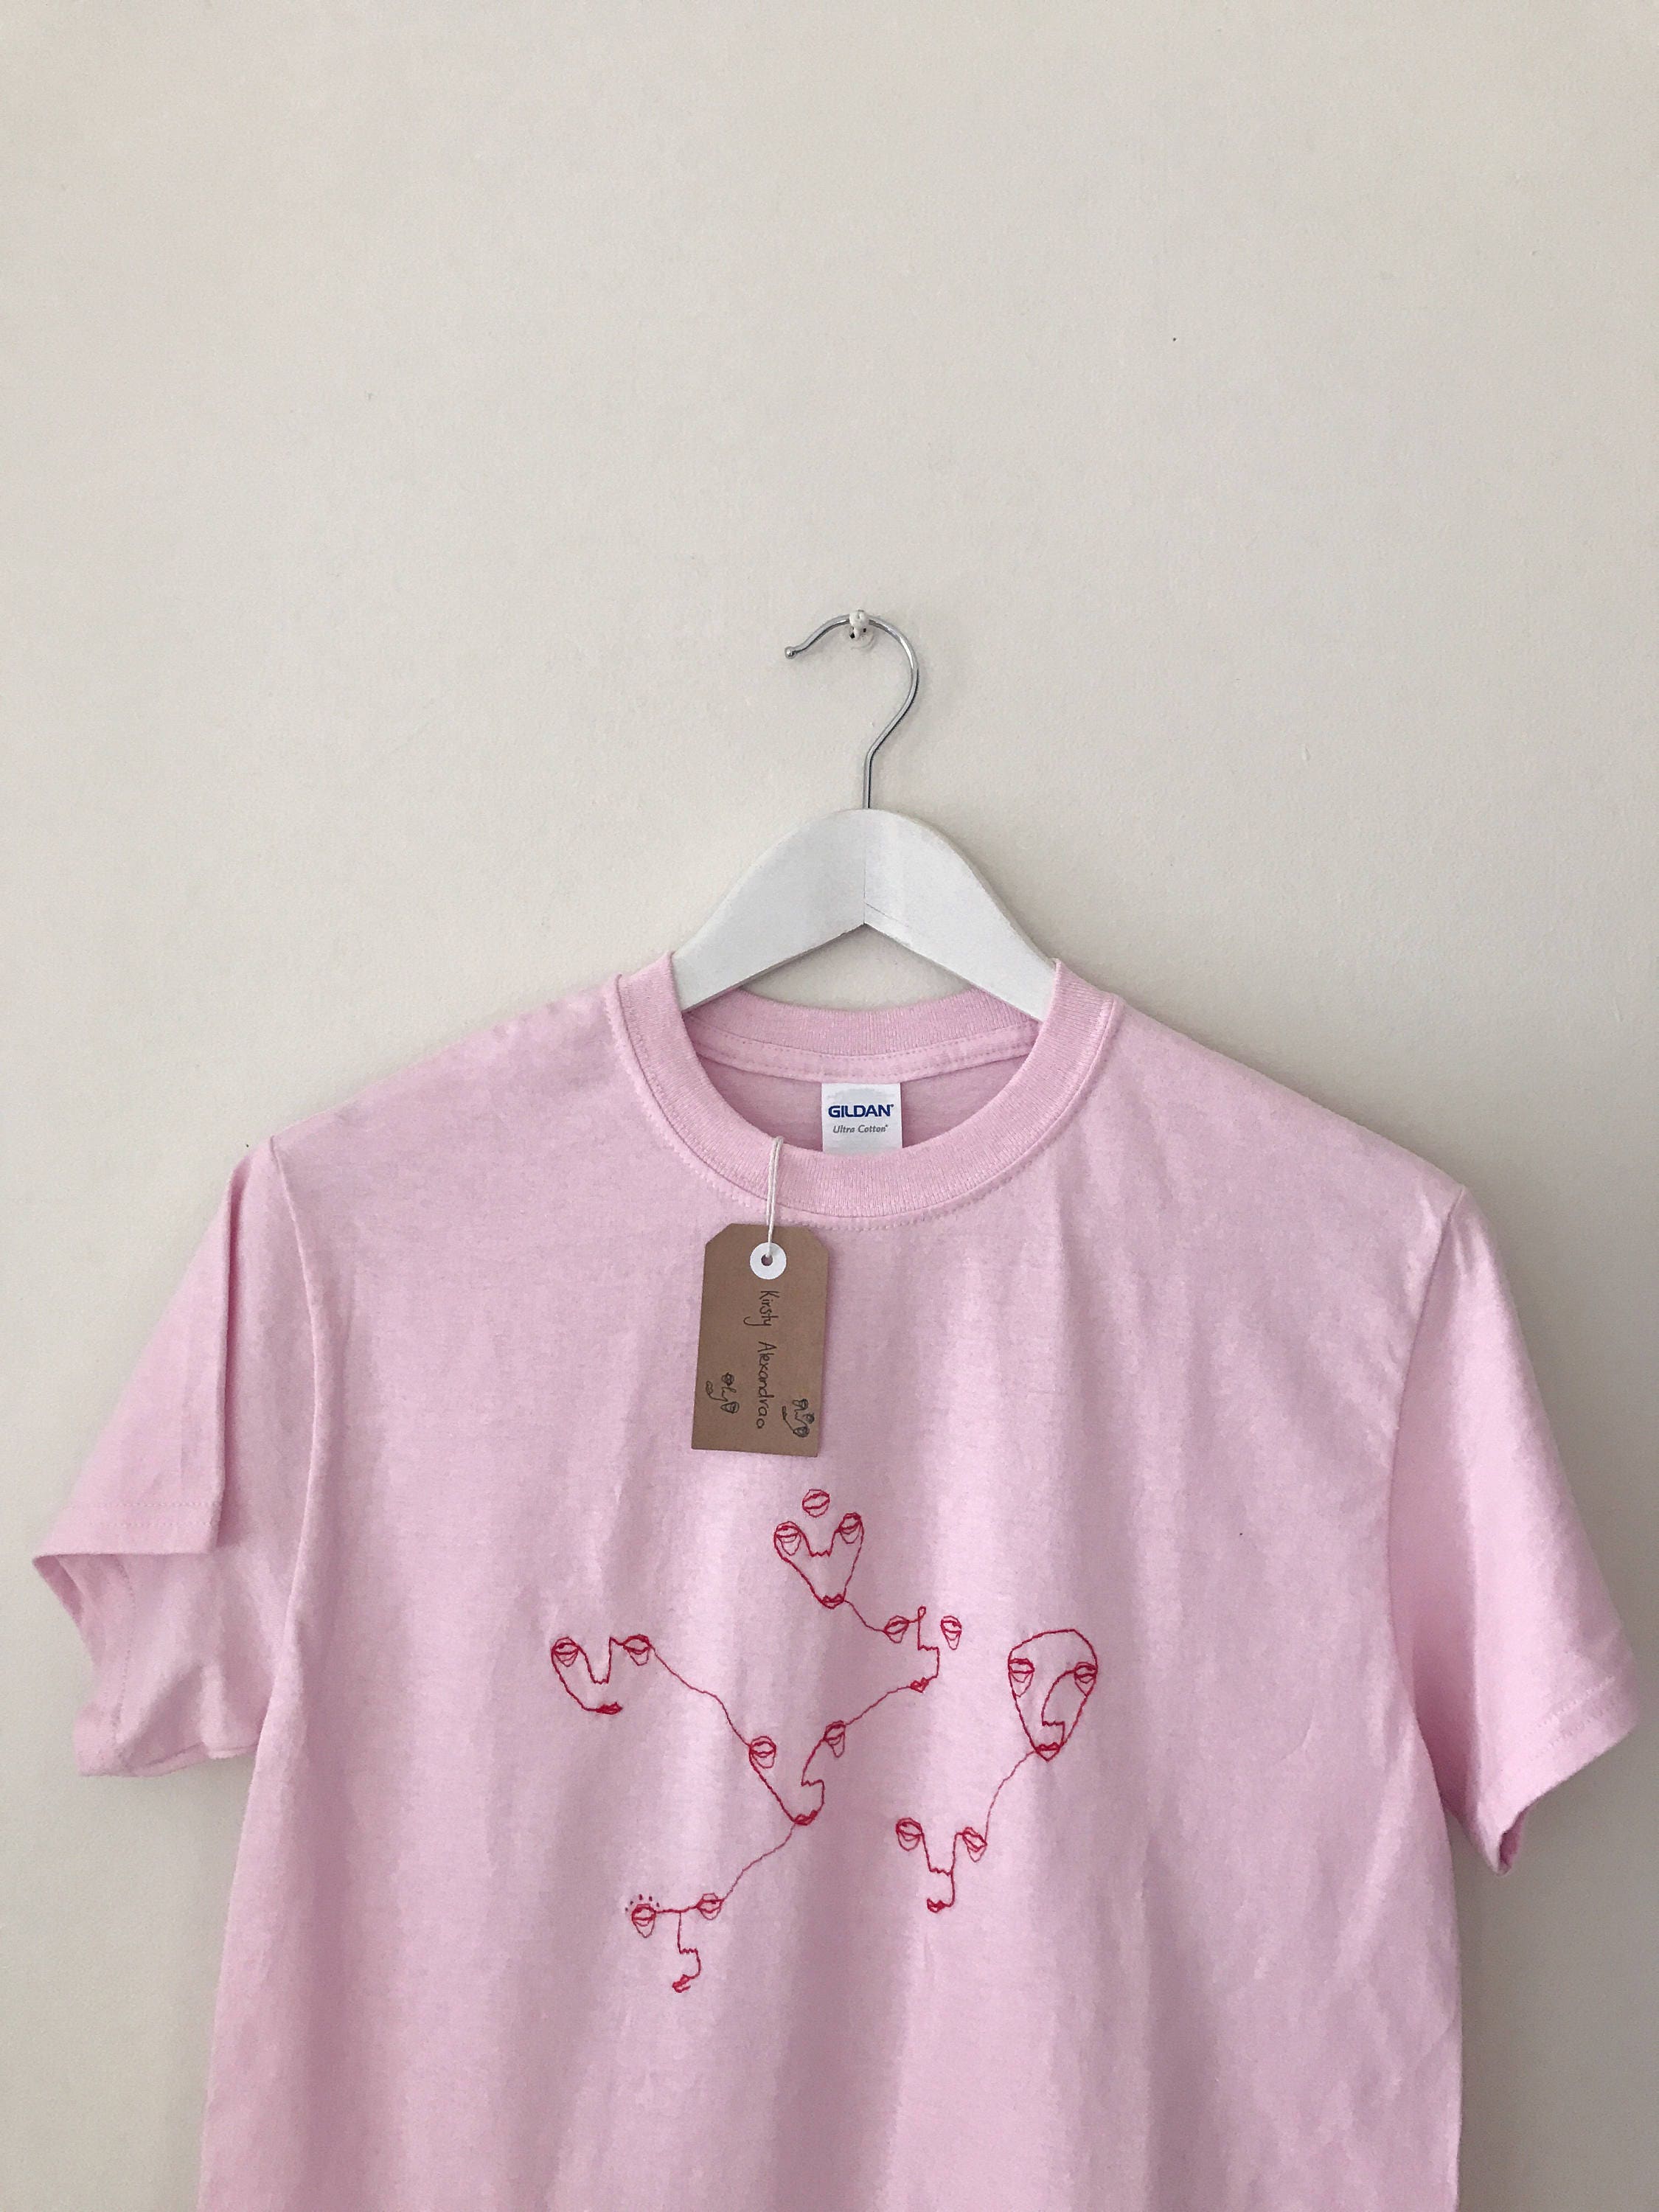 Hand embroidered tshirt